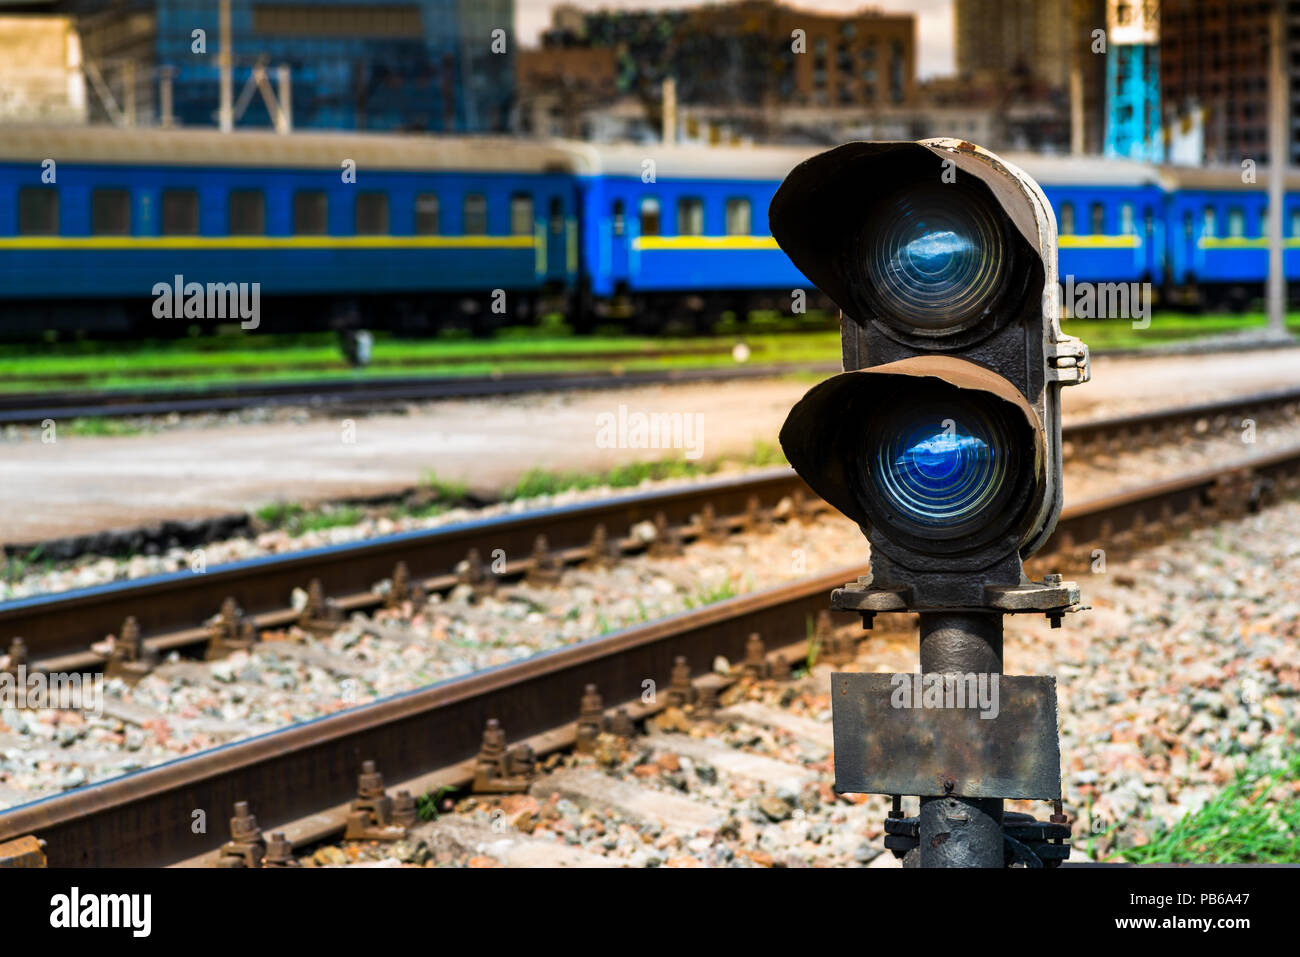 blue signal of the semaphore on the background of the railway track Stock Photo